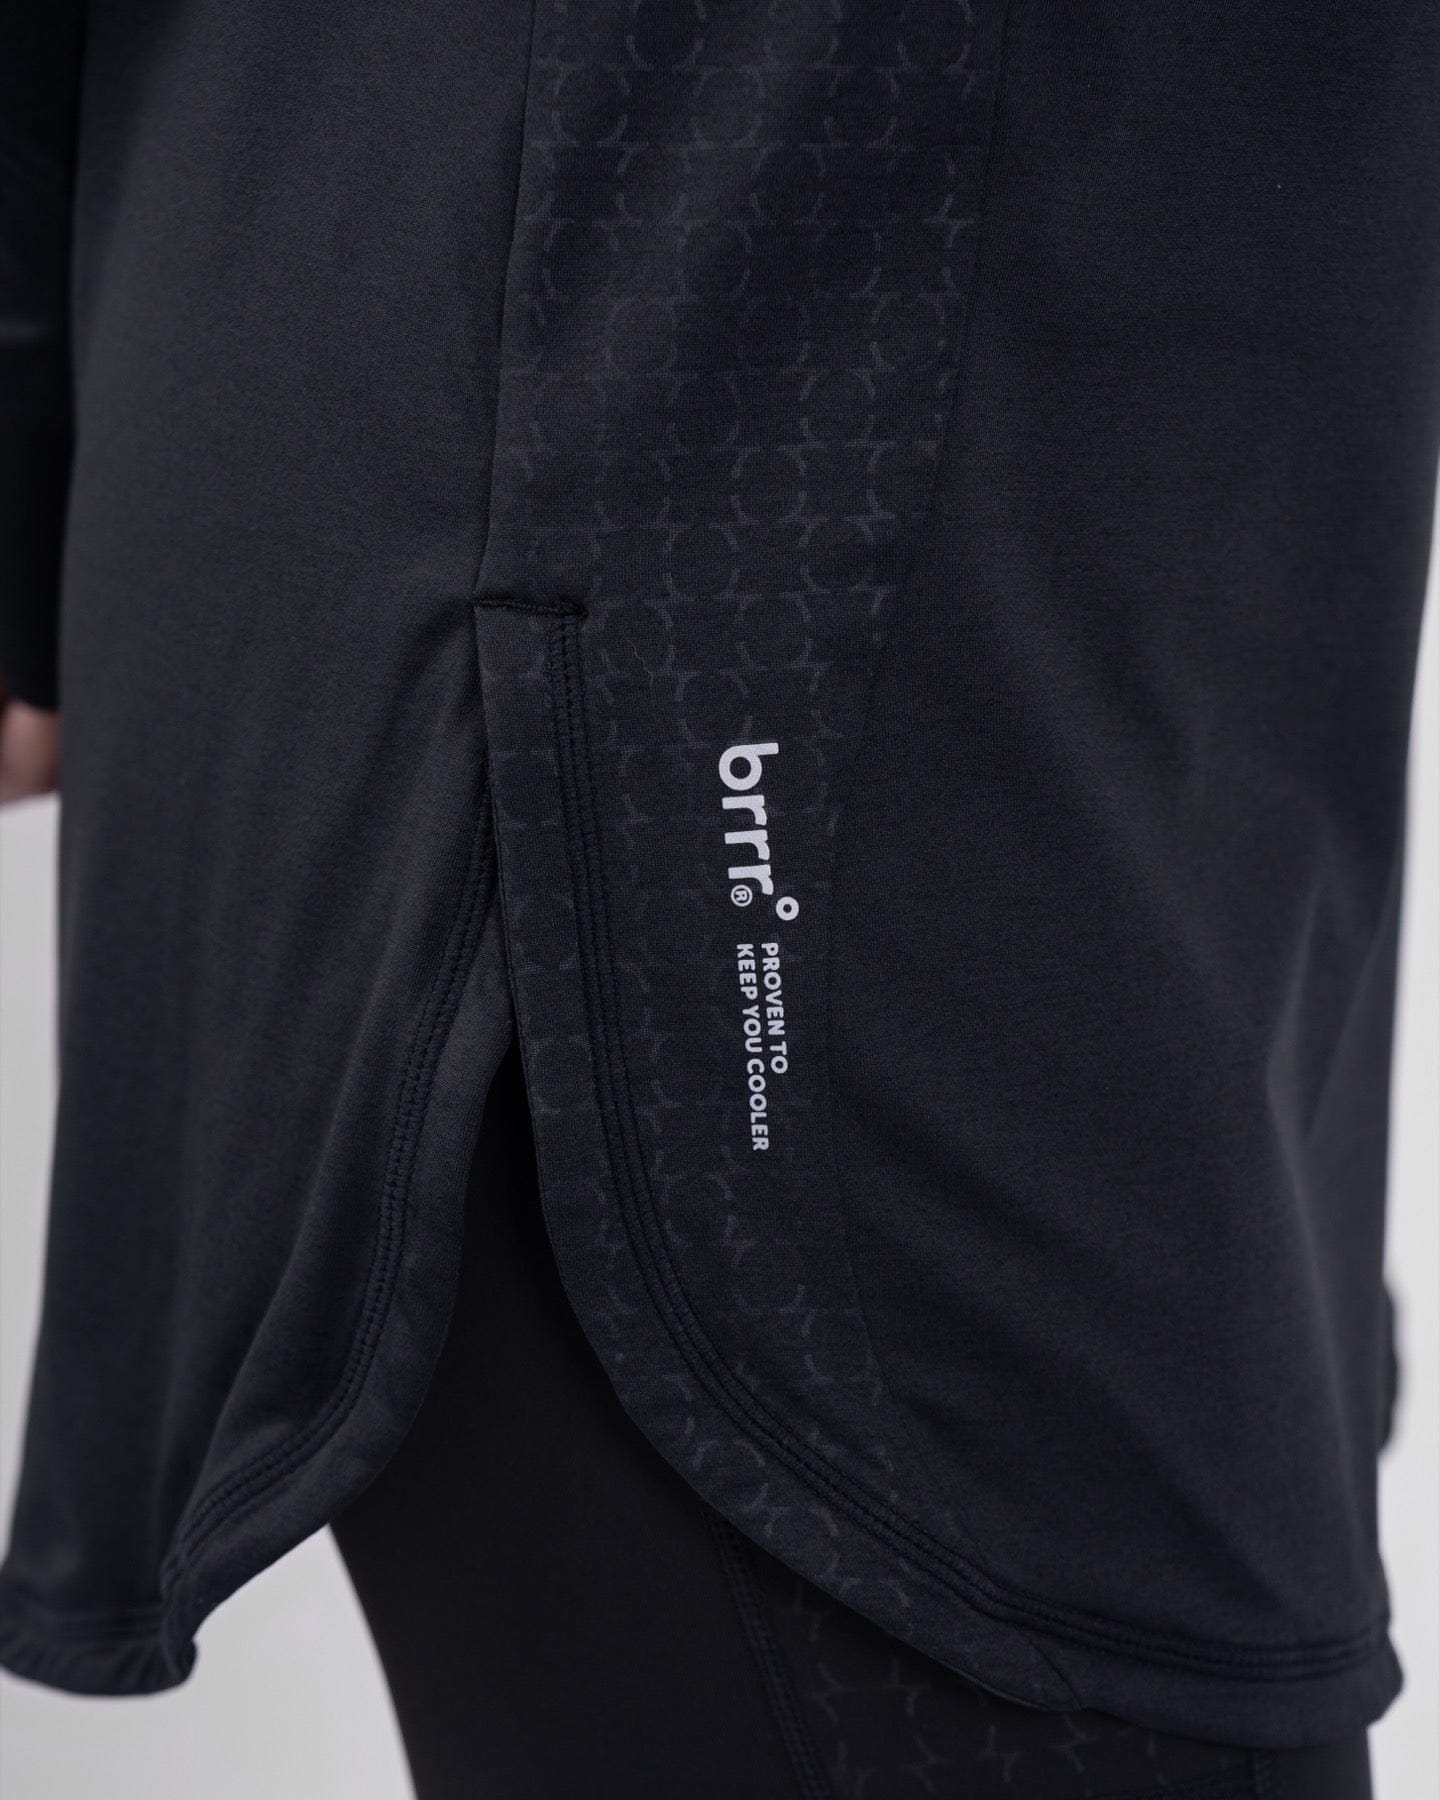 Close-up of a black high neck long sleeve shirt ARMA by Qynda featuring a subtle pattern.